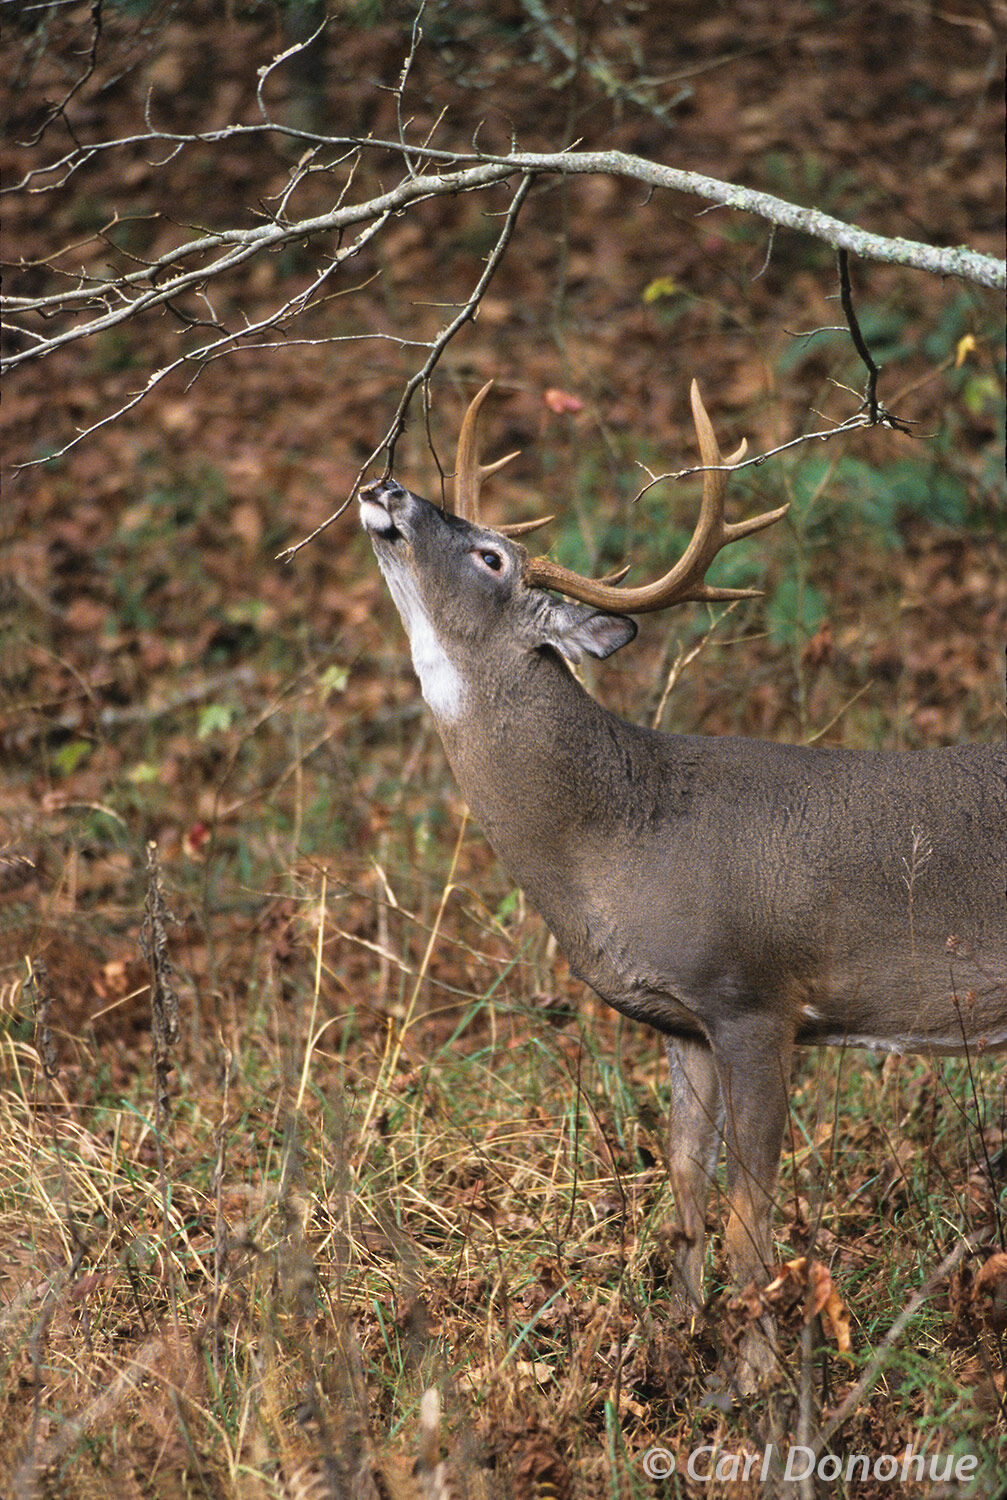 Whitetail deer buck licks a branch, testing for scents during the rut. Cades Cove, Great Smoky Mountains National Park, Tennessee...